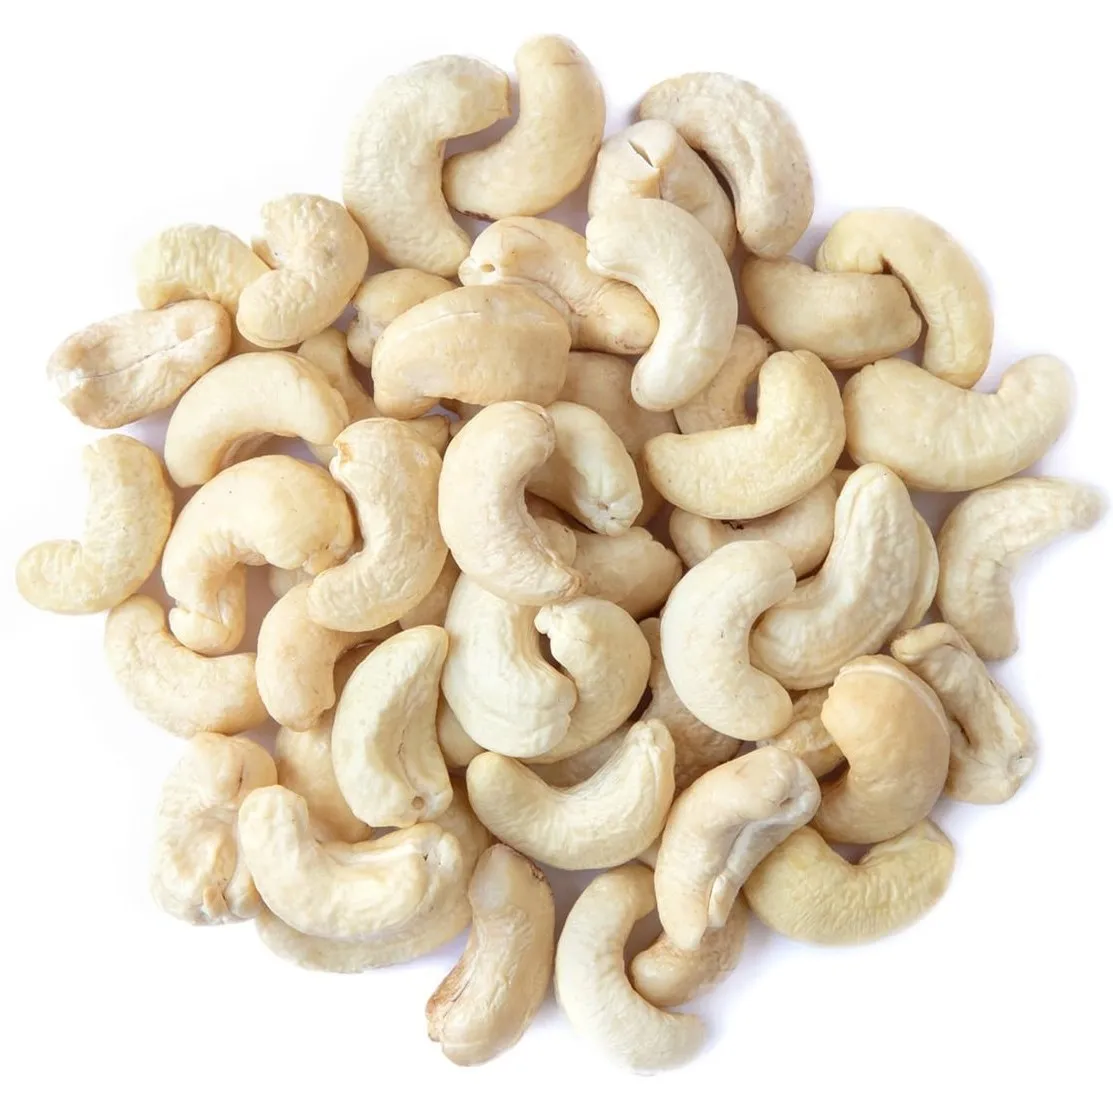 The purchase price of bulk raw cashews + properties, disadvantages and advantages